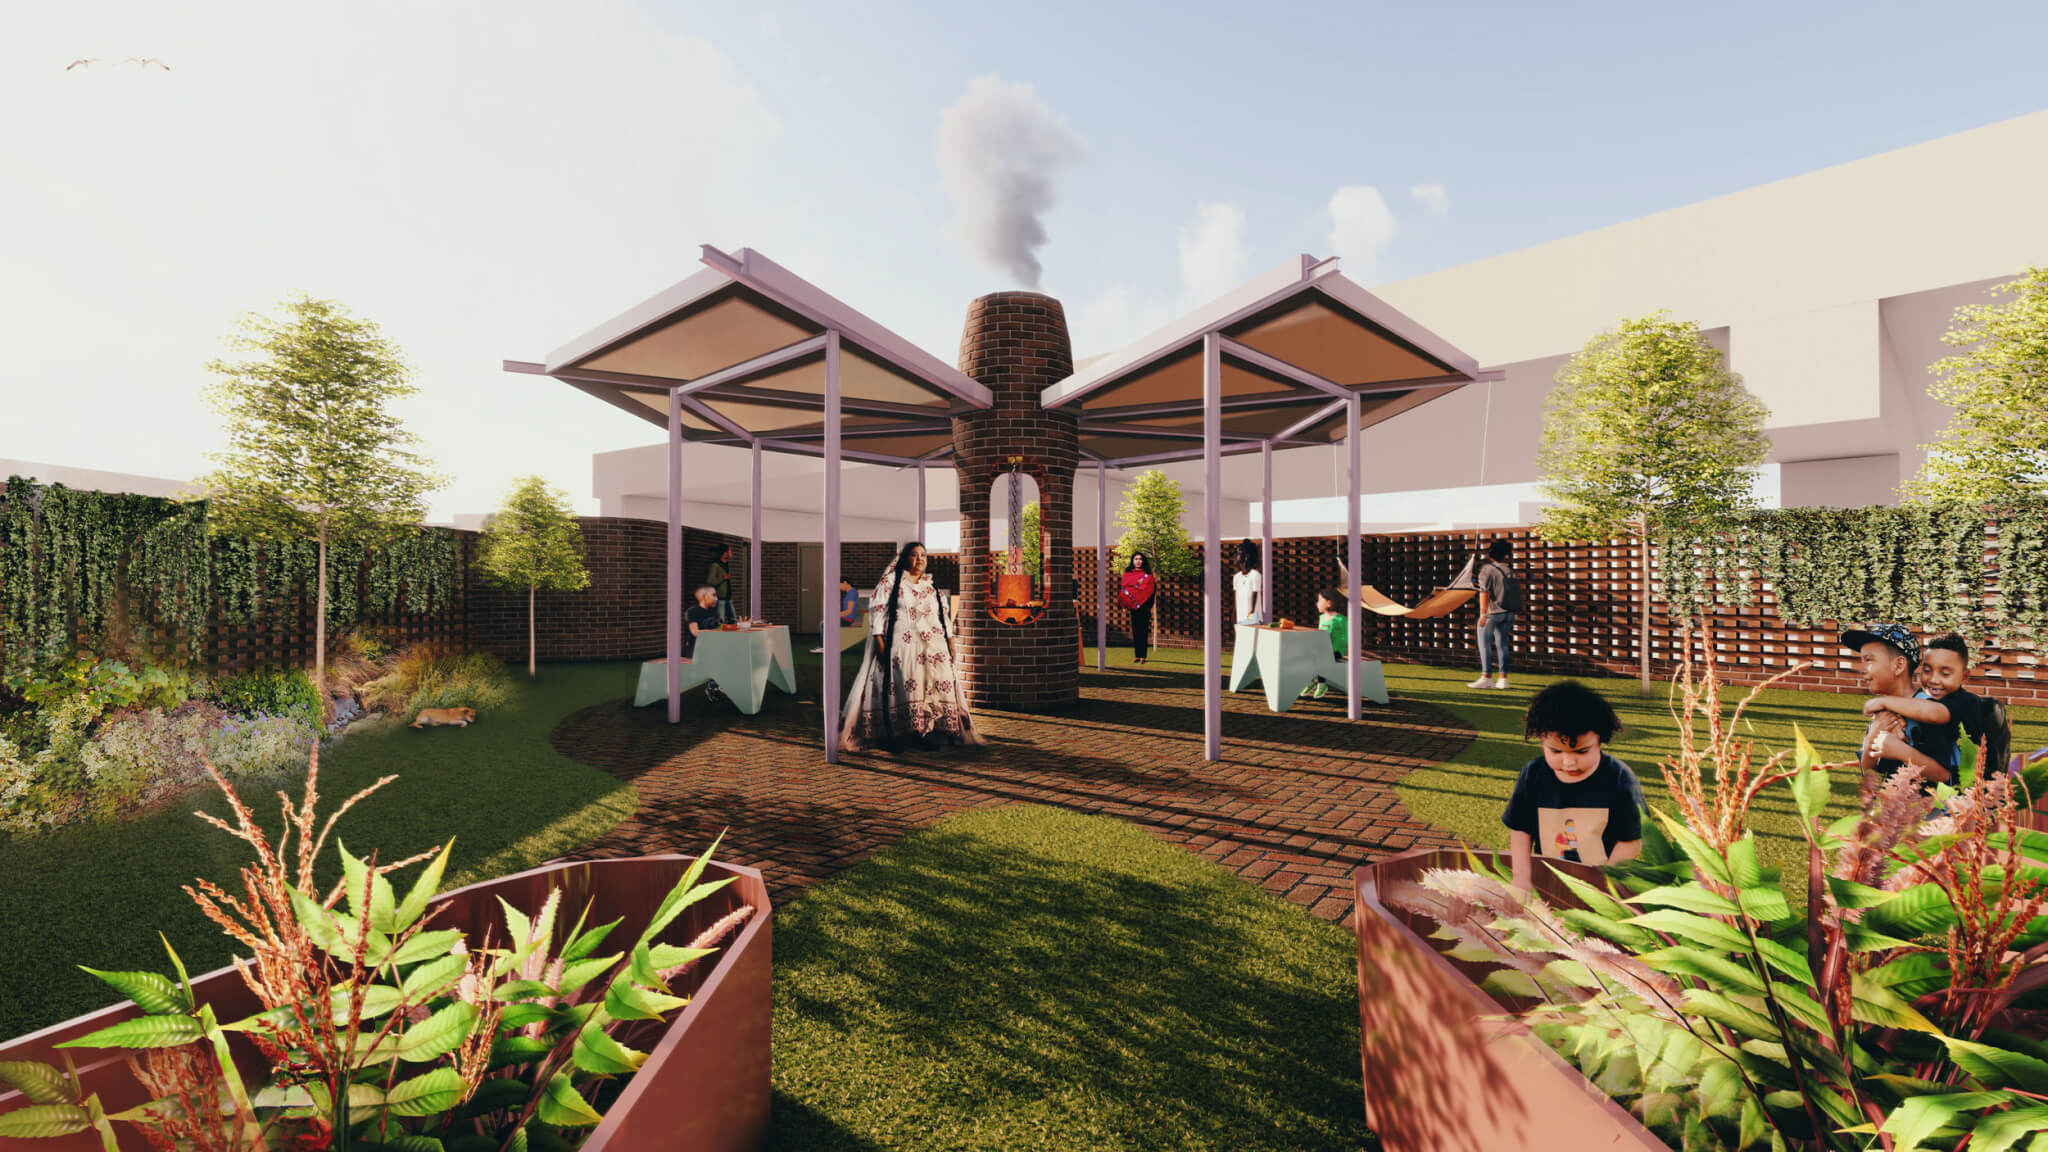 Render of a brick pavillion with a hearth inside and a octagonal roof membrane with a garden as background.